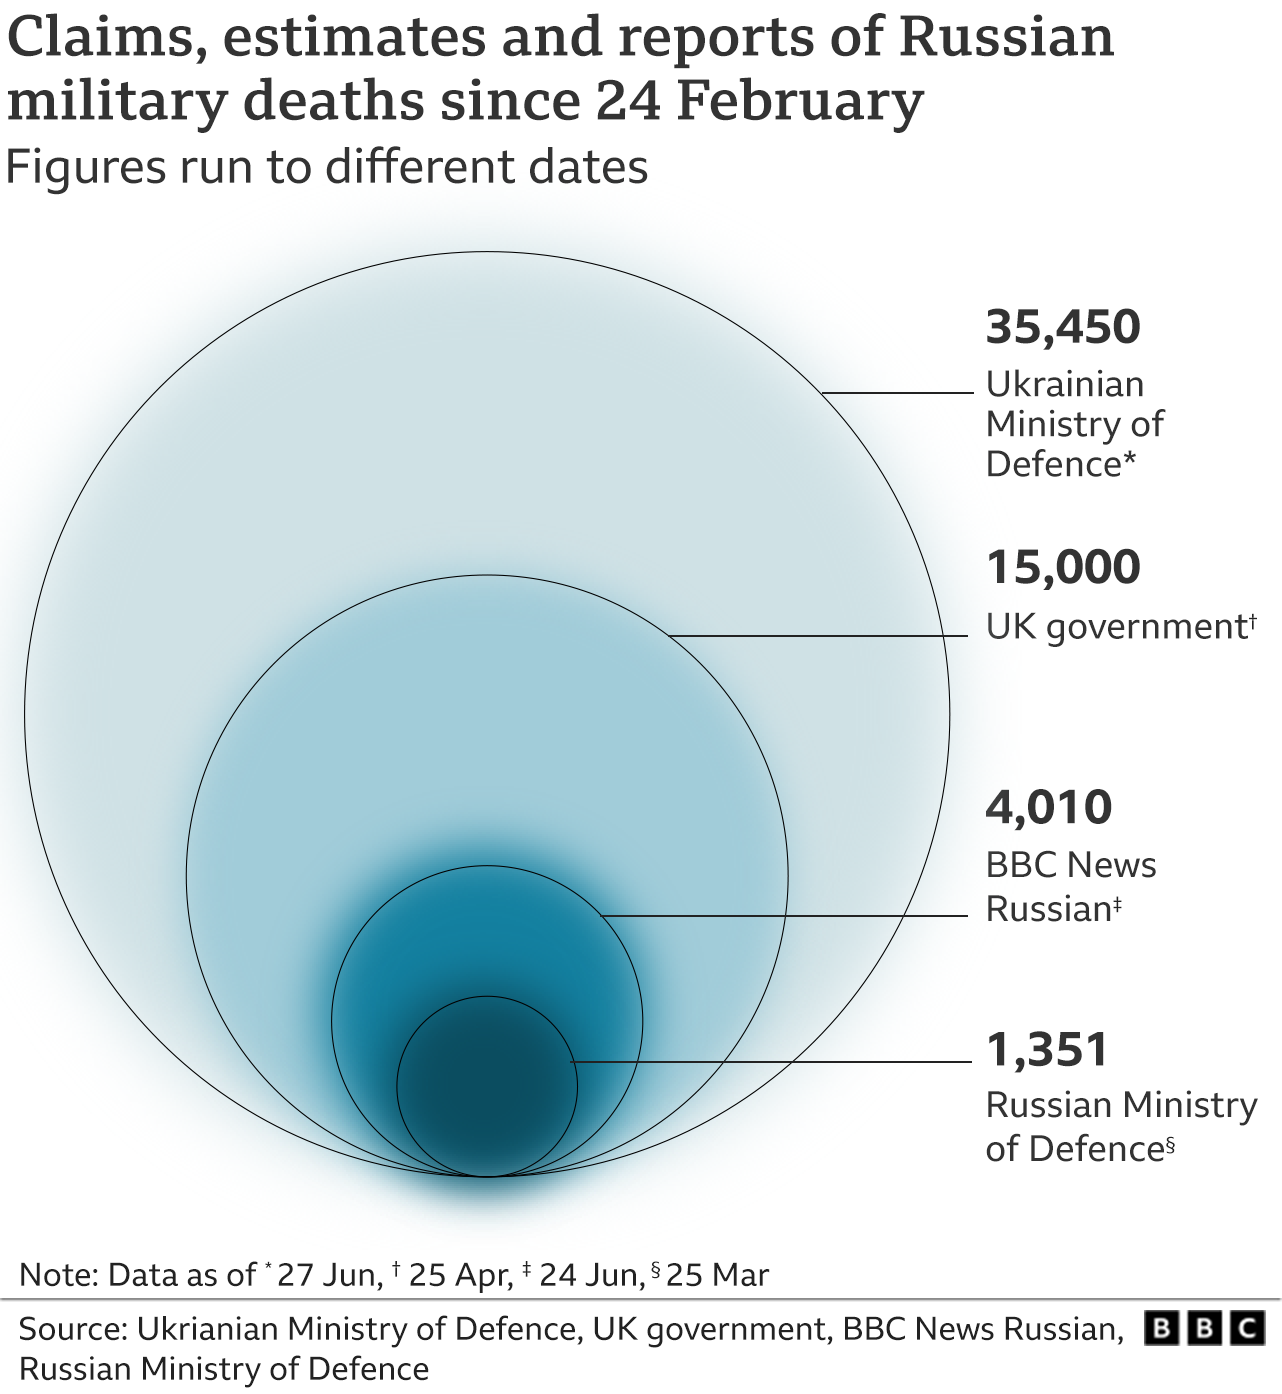 Chart showing four counts of Russian military deaths since the conflict began on 24 February 2022. The various figures range from 1,351 claimed by the Russian Ministry of Defence on 25 March to 35,450 claimed by the Ukrainian Ministry of Defence on 27 June. The BBC's Russian Service has independently verified 4,010 Russian deaths as of 24 June, and the UK government's latest estimate was 15,000 Russian deaths in late April.